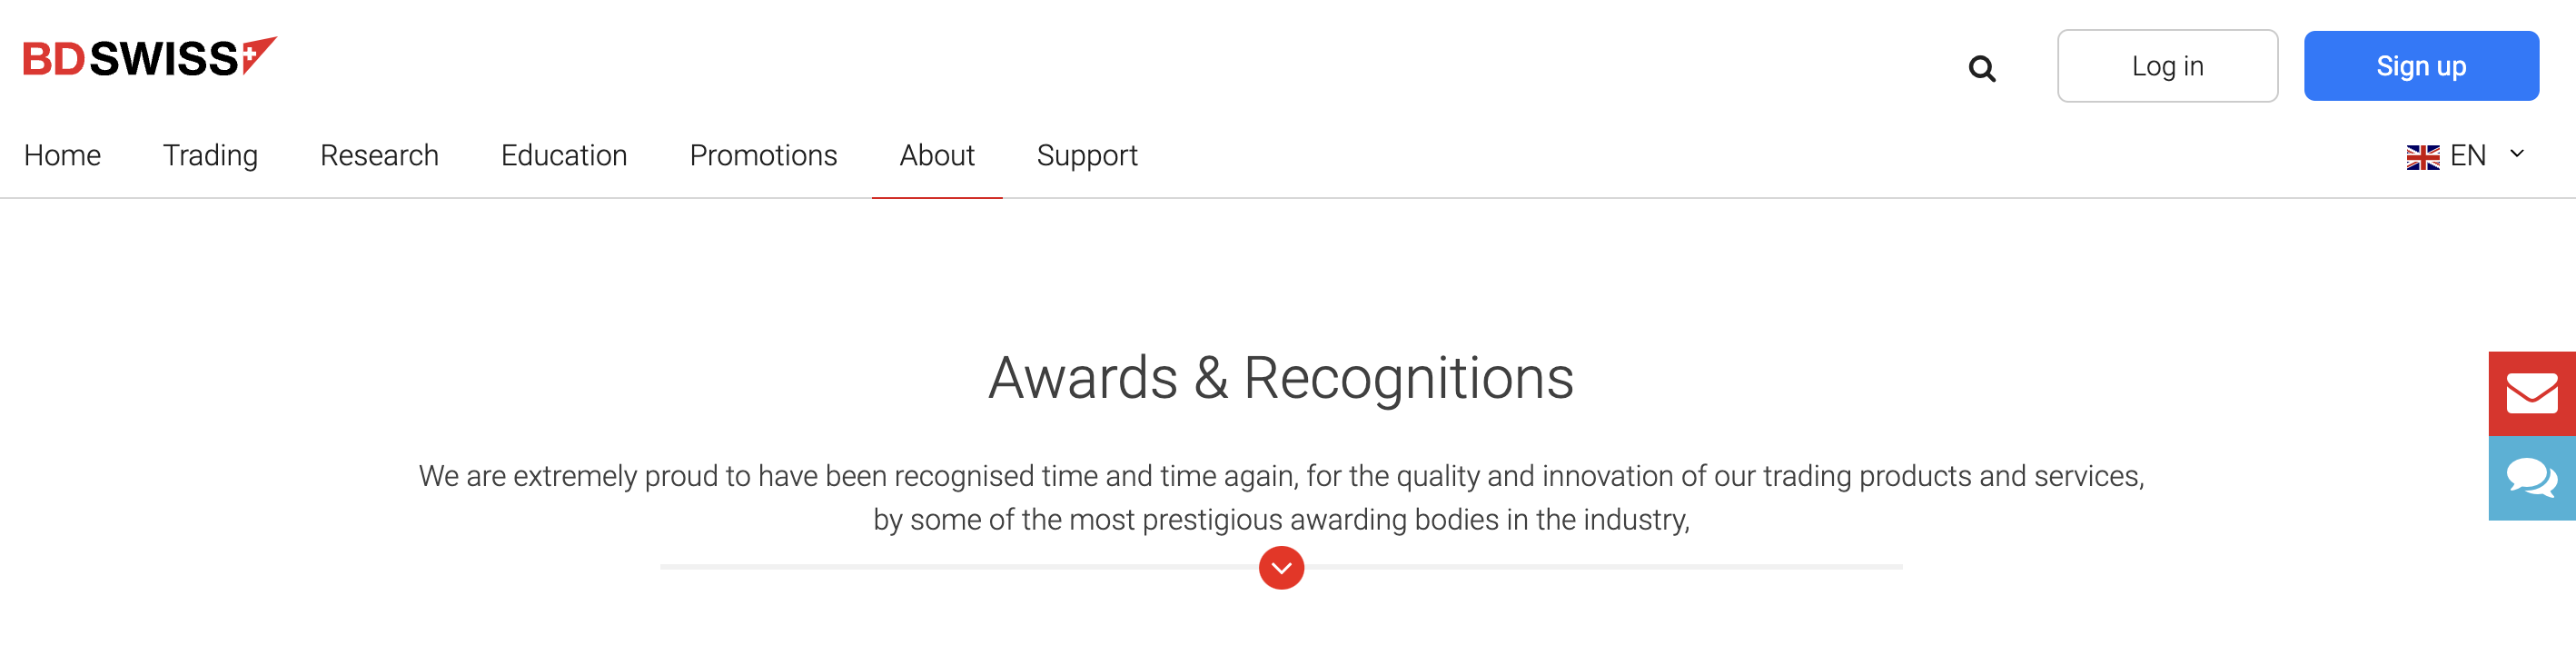 BDSwiss Awards and Recognition